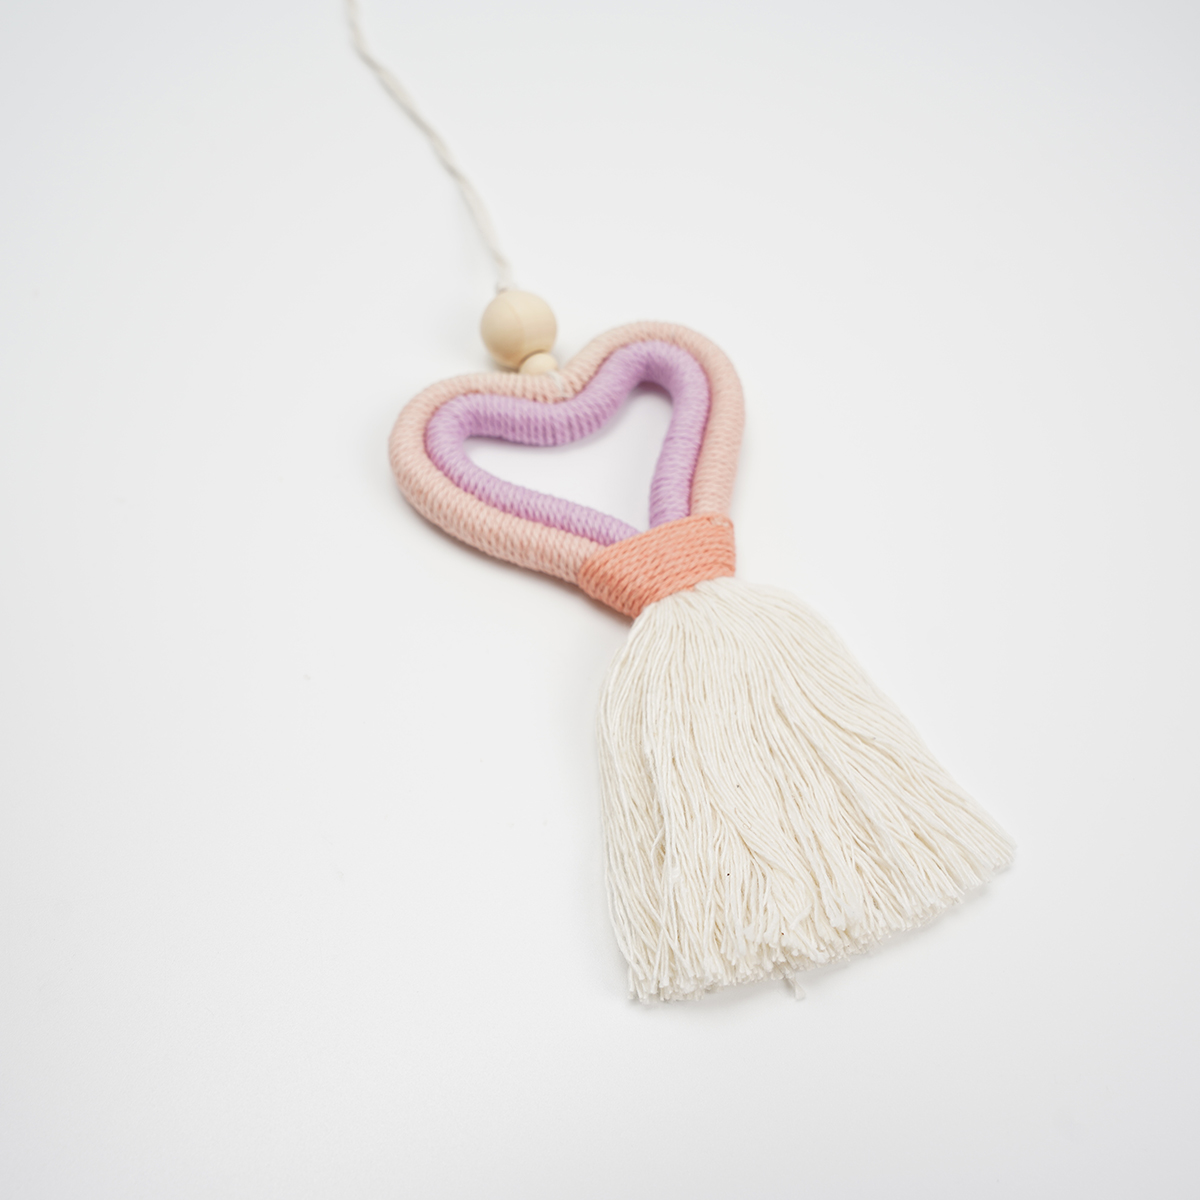 Knitted Heart-Shaped Car Pendant2